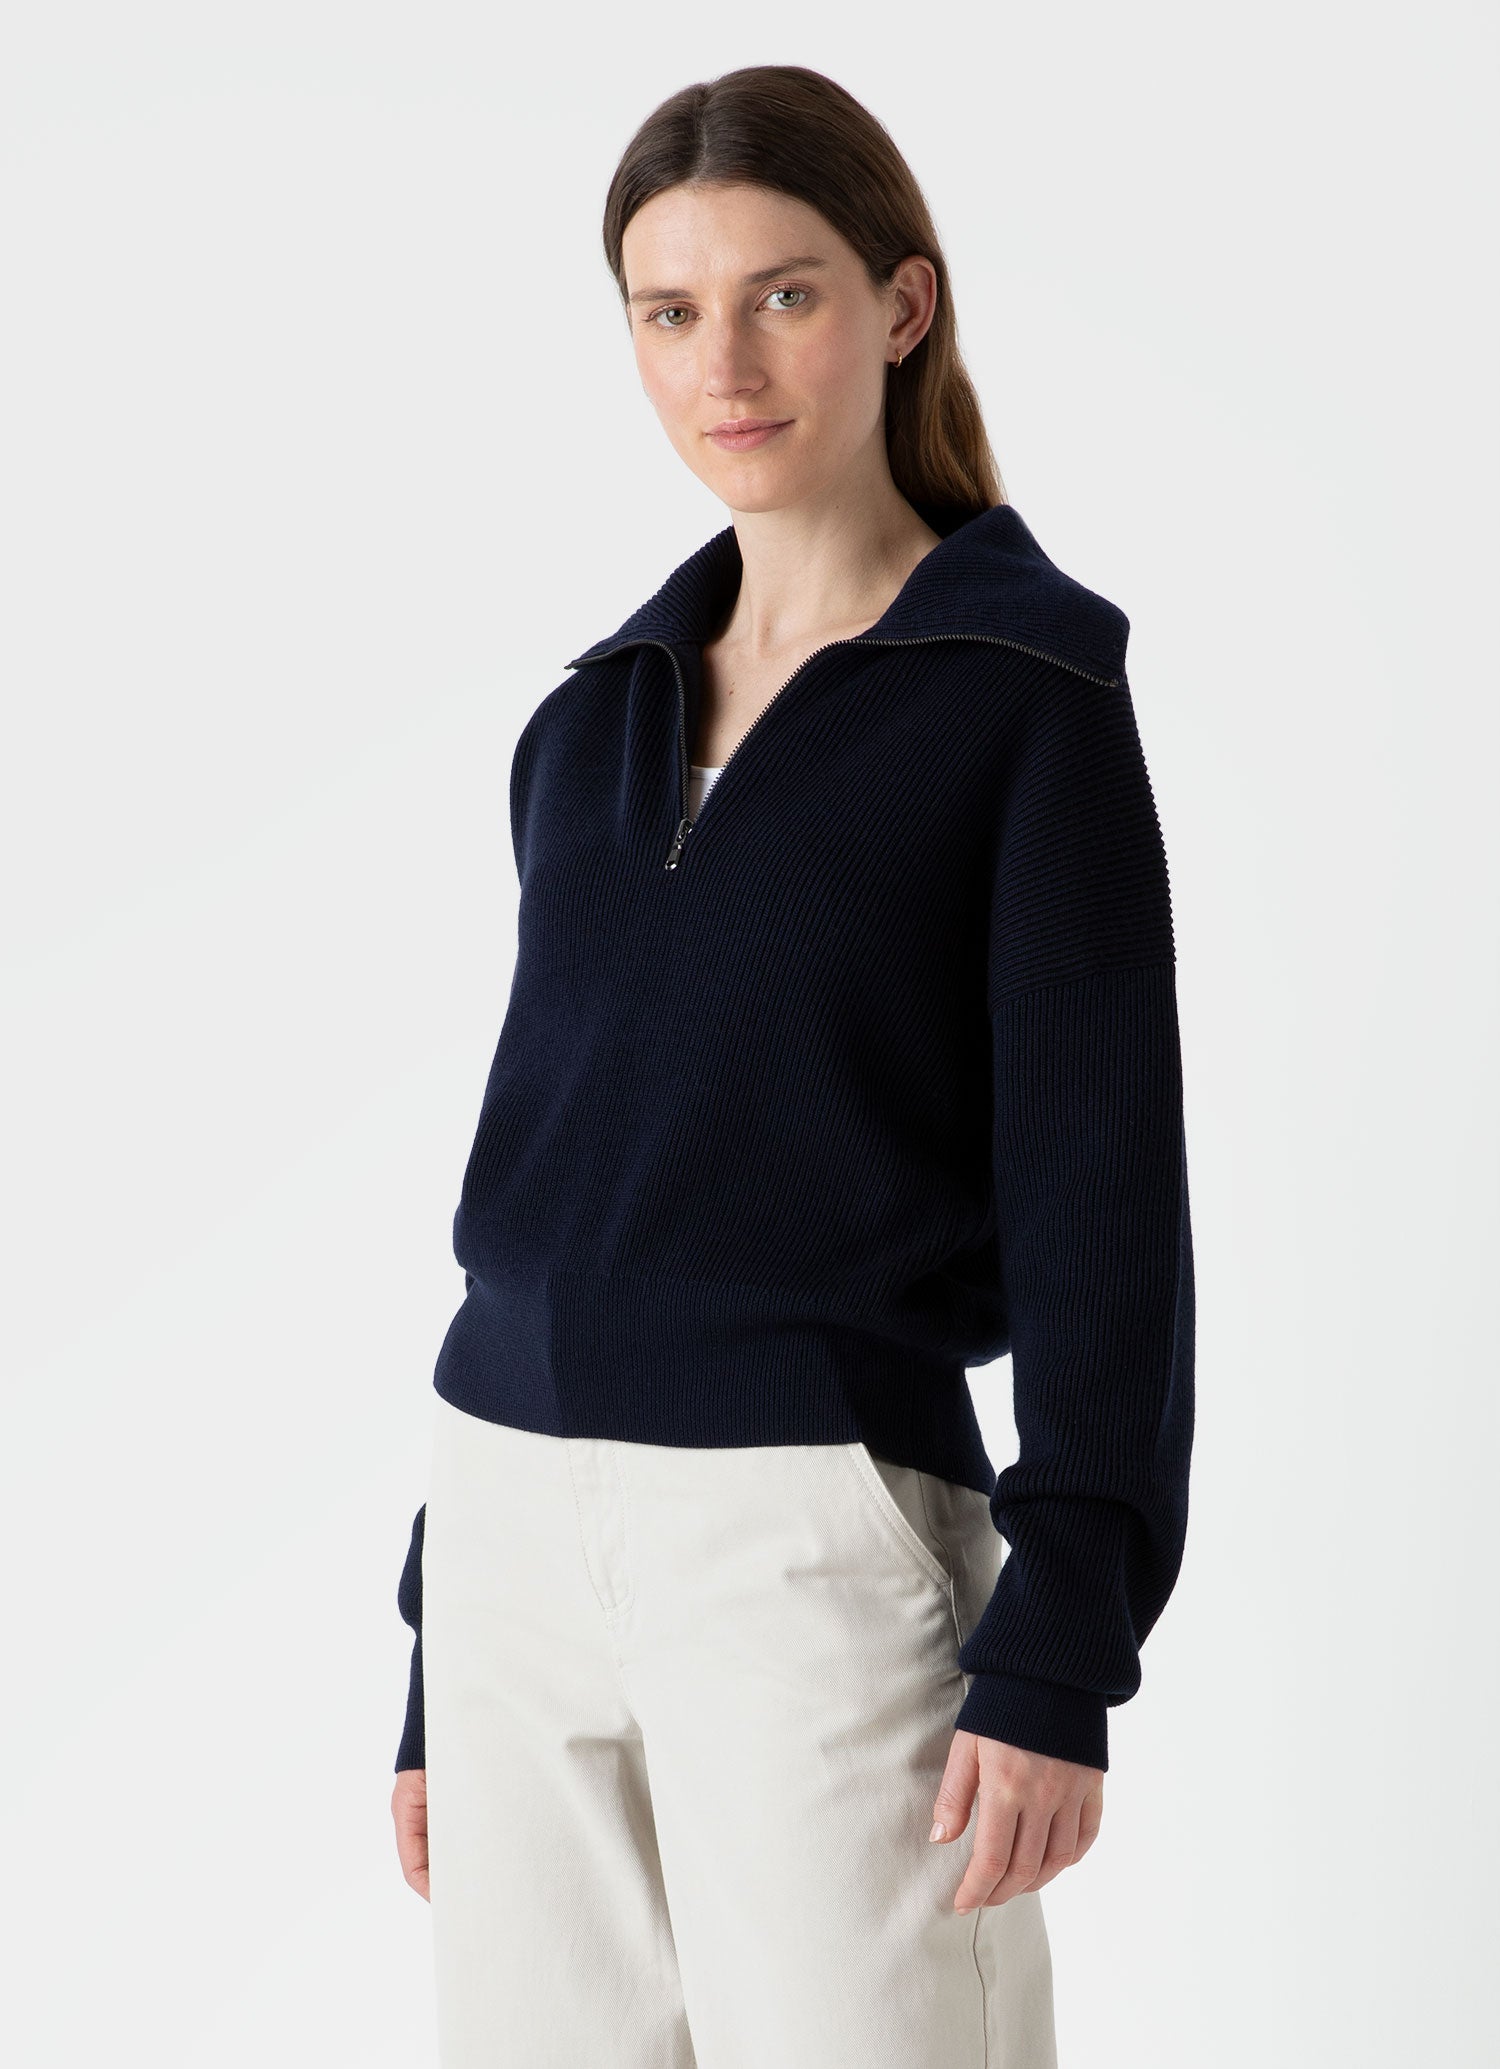 Blue Jumper Womens Hotsell | www.southernandwessexbcc.co.uk